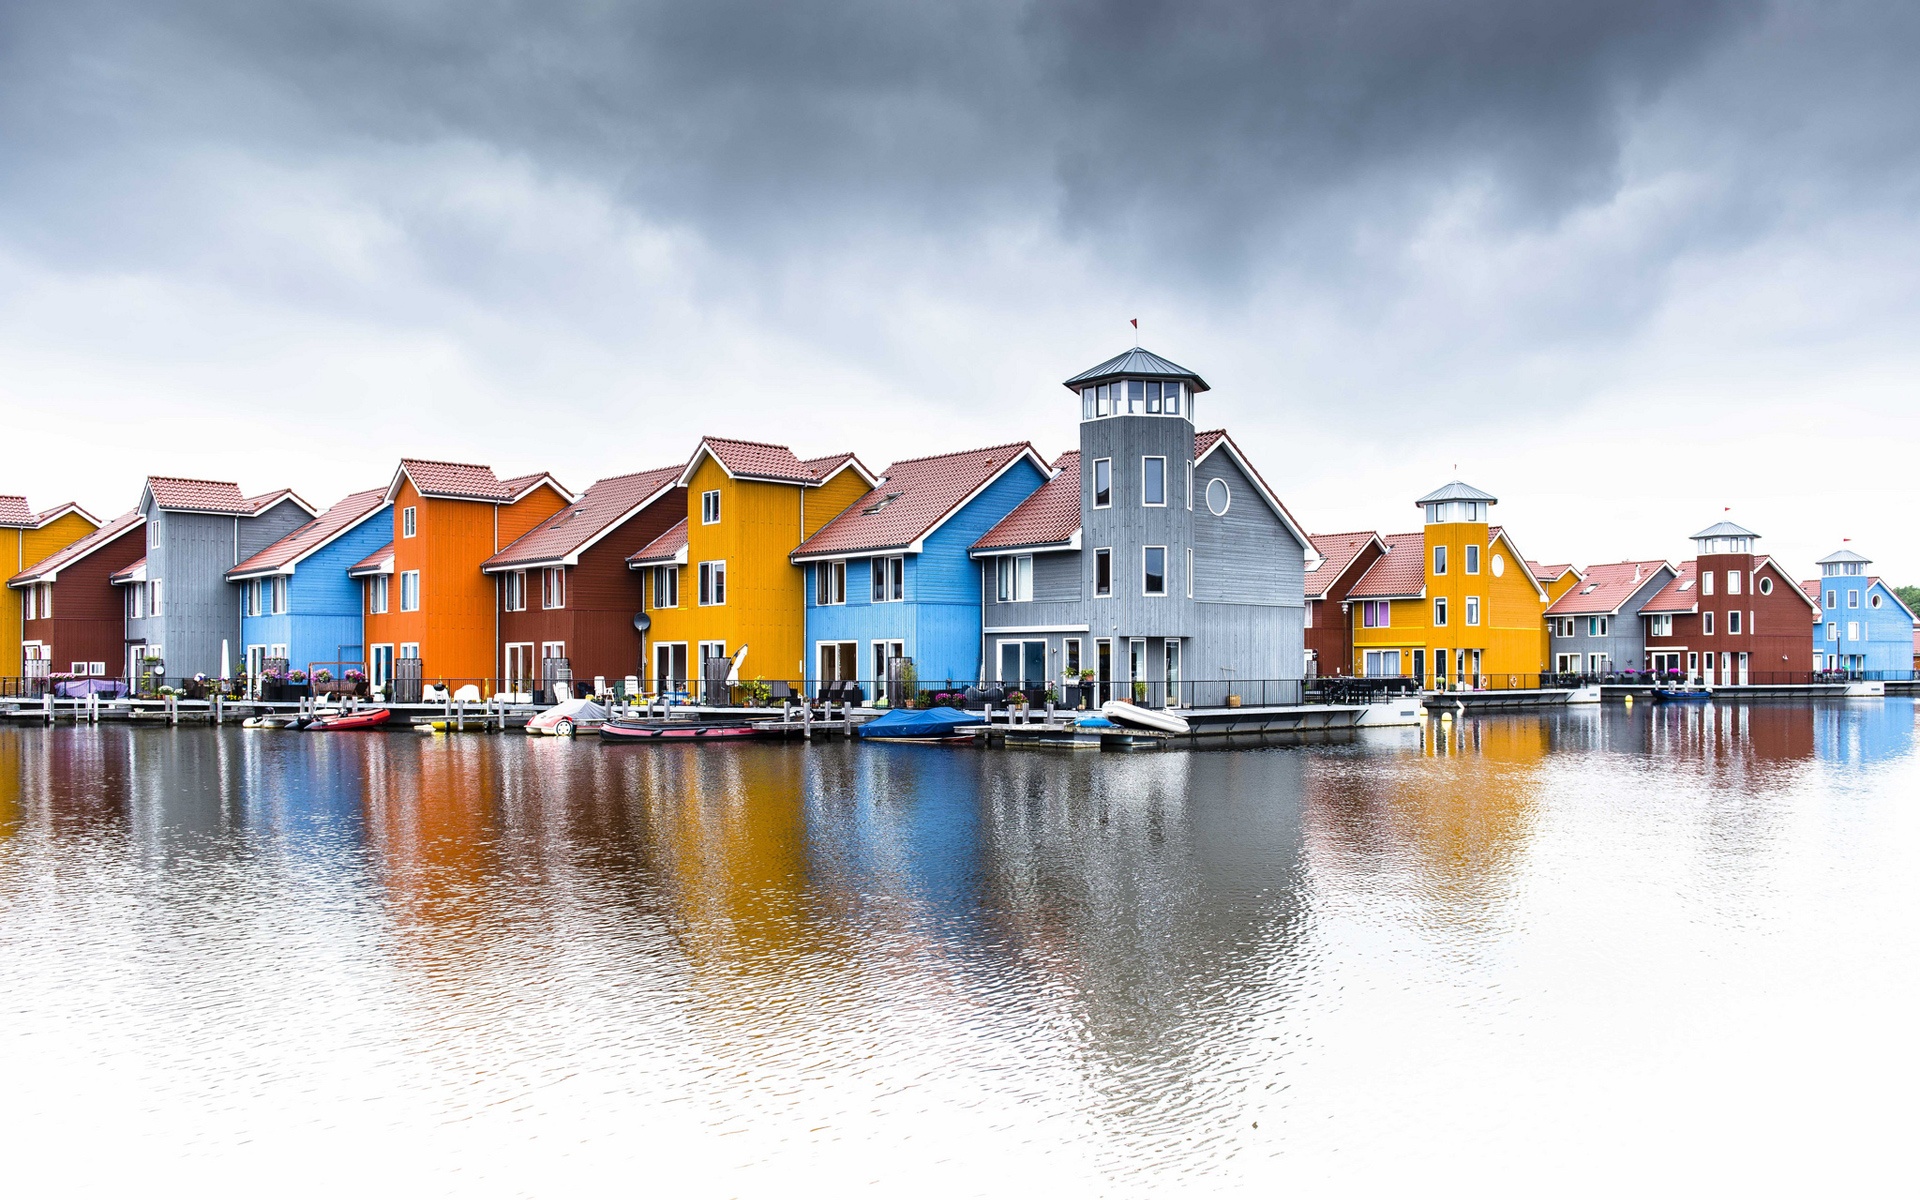 HD desktop wallpaper: Lake, House, Colors, Colorful, Netherlands, Town,  Groningen, Man Made, Towns download free picture #384067